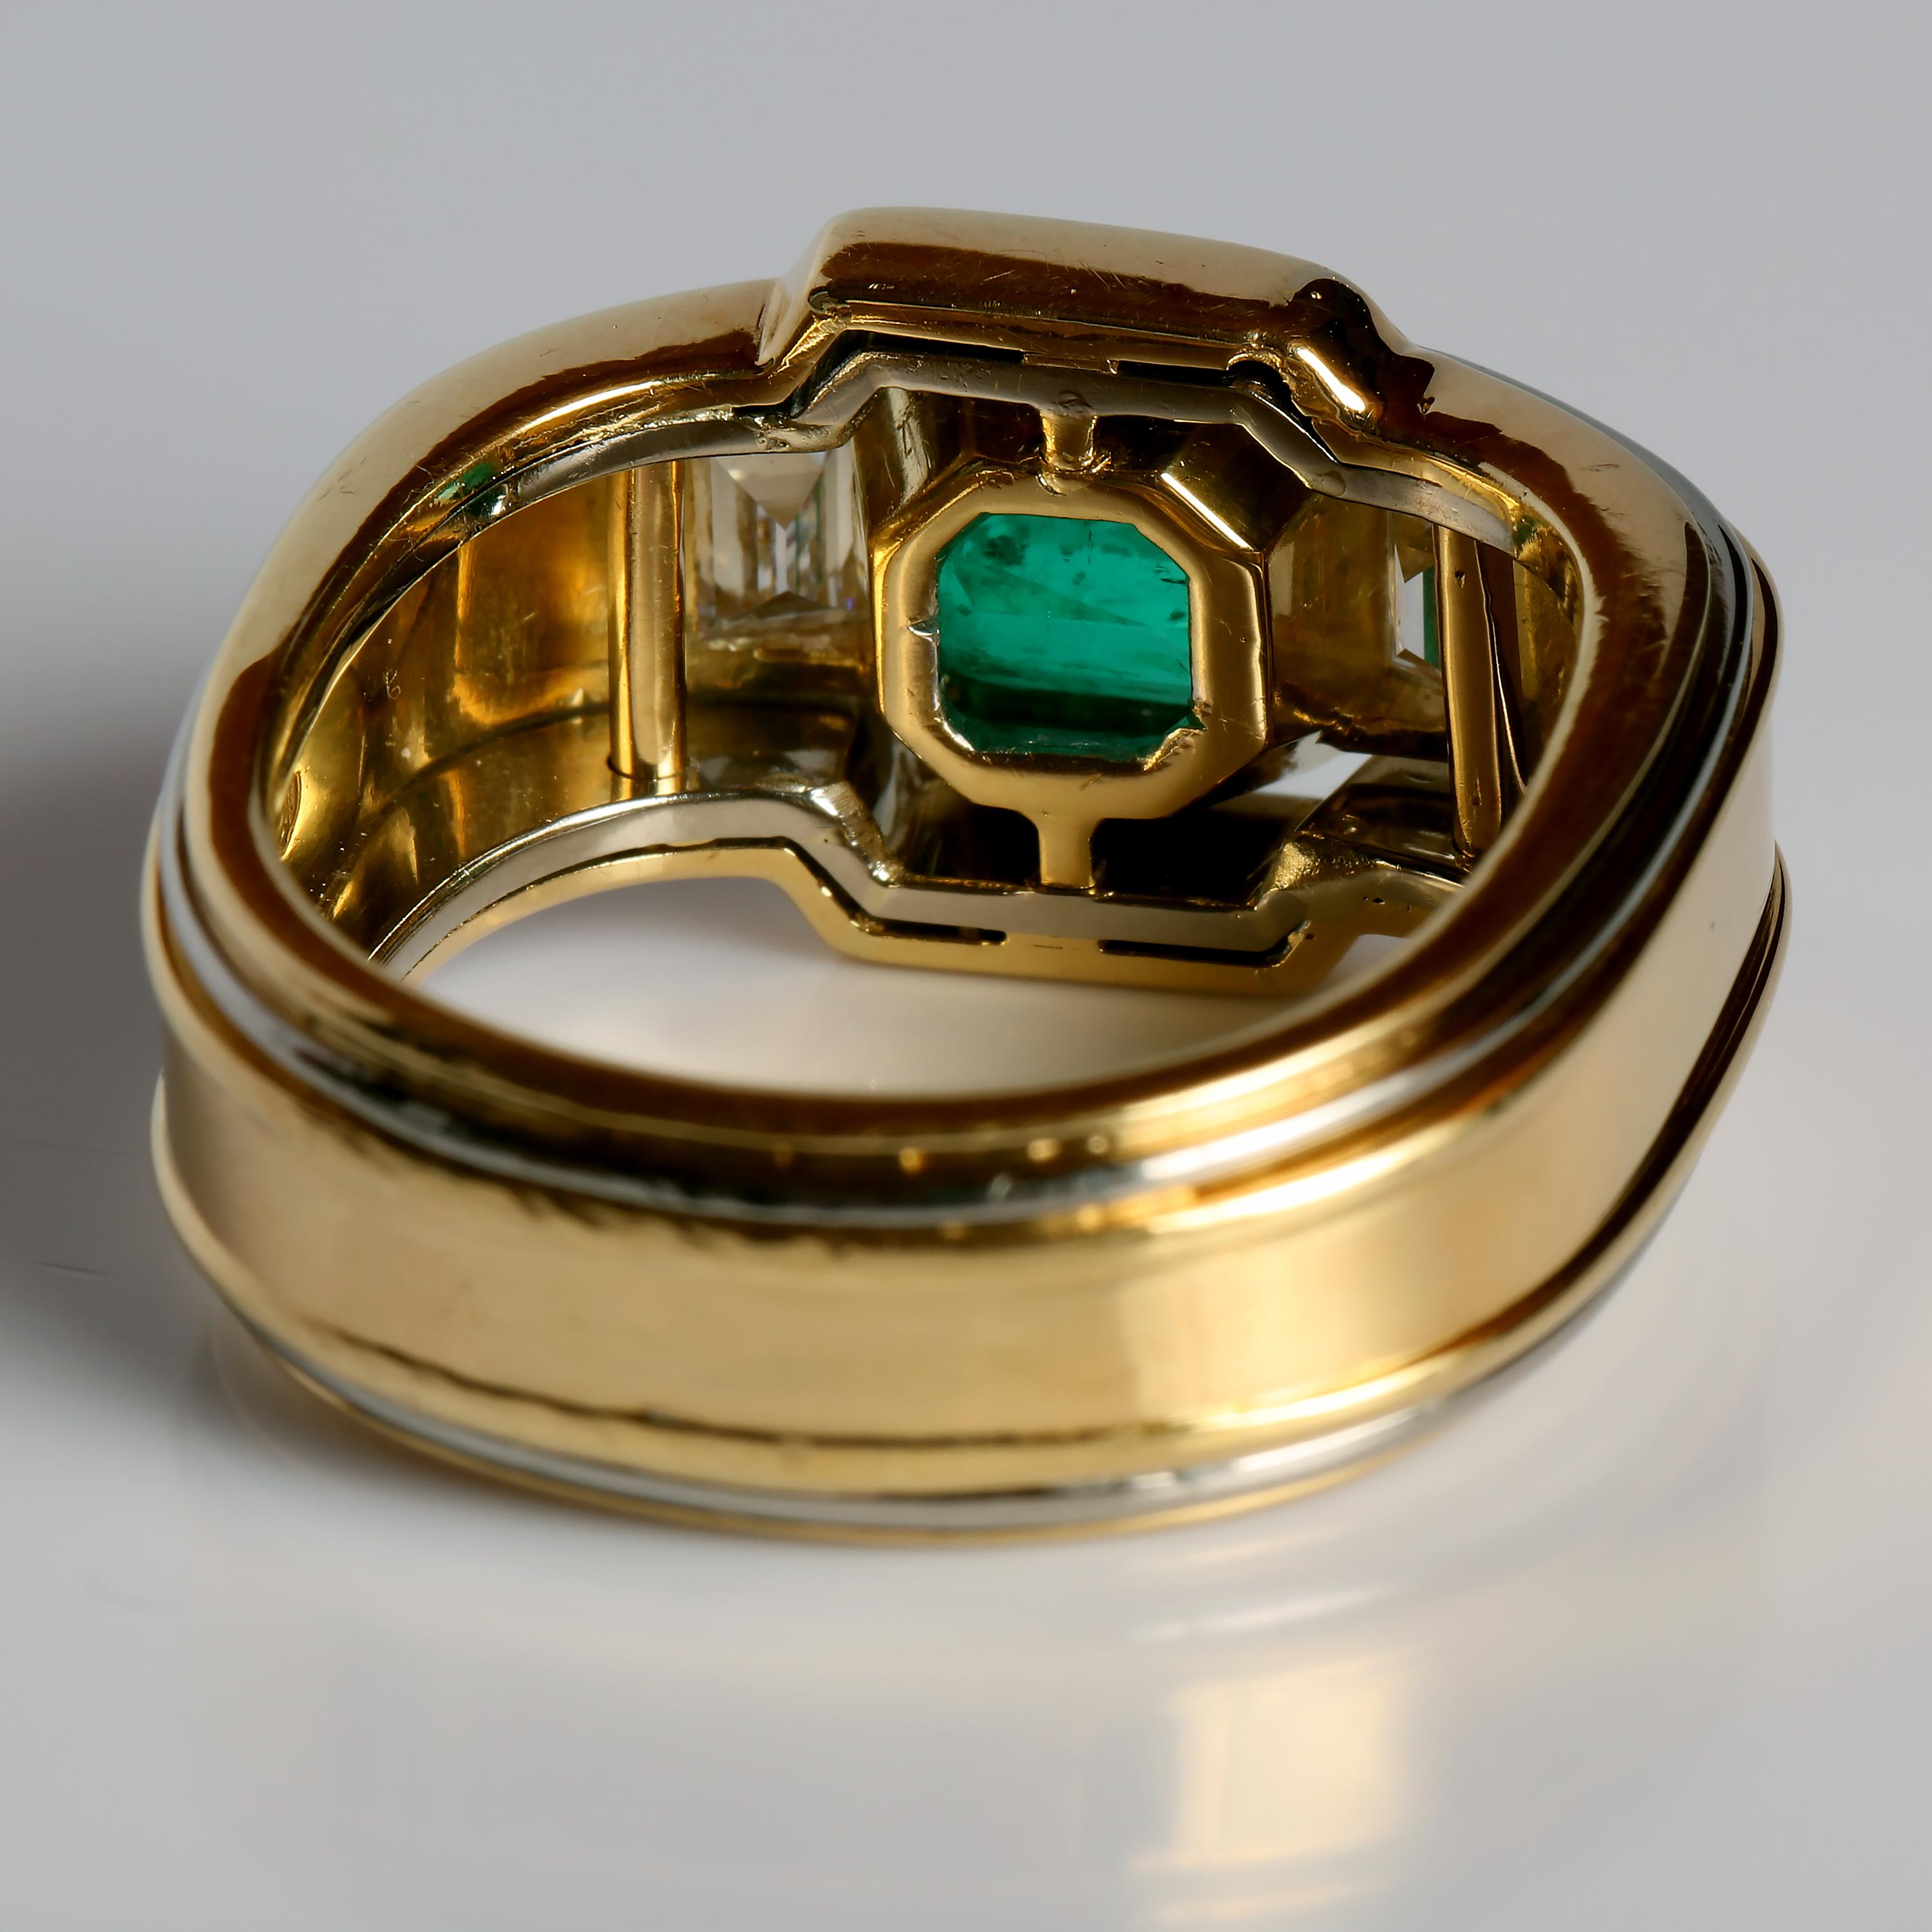 Art Deco Men's 2.5 Carat Certified Colombian Emerald Ring in Gold With Diamonds